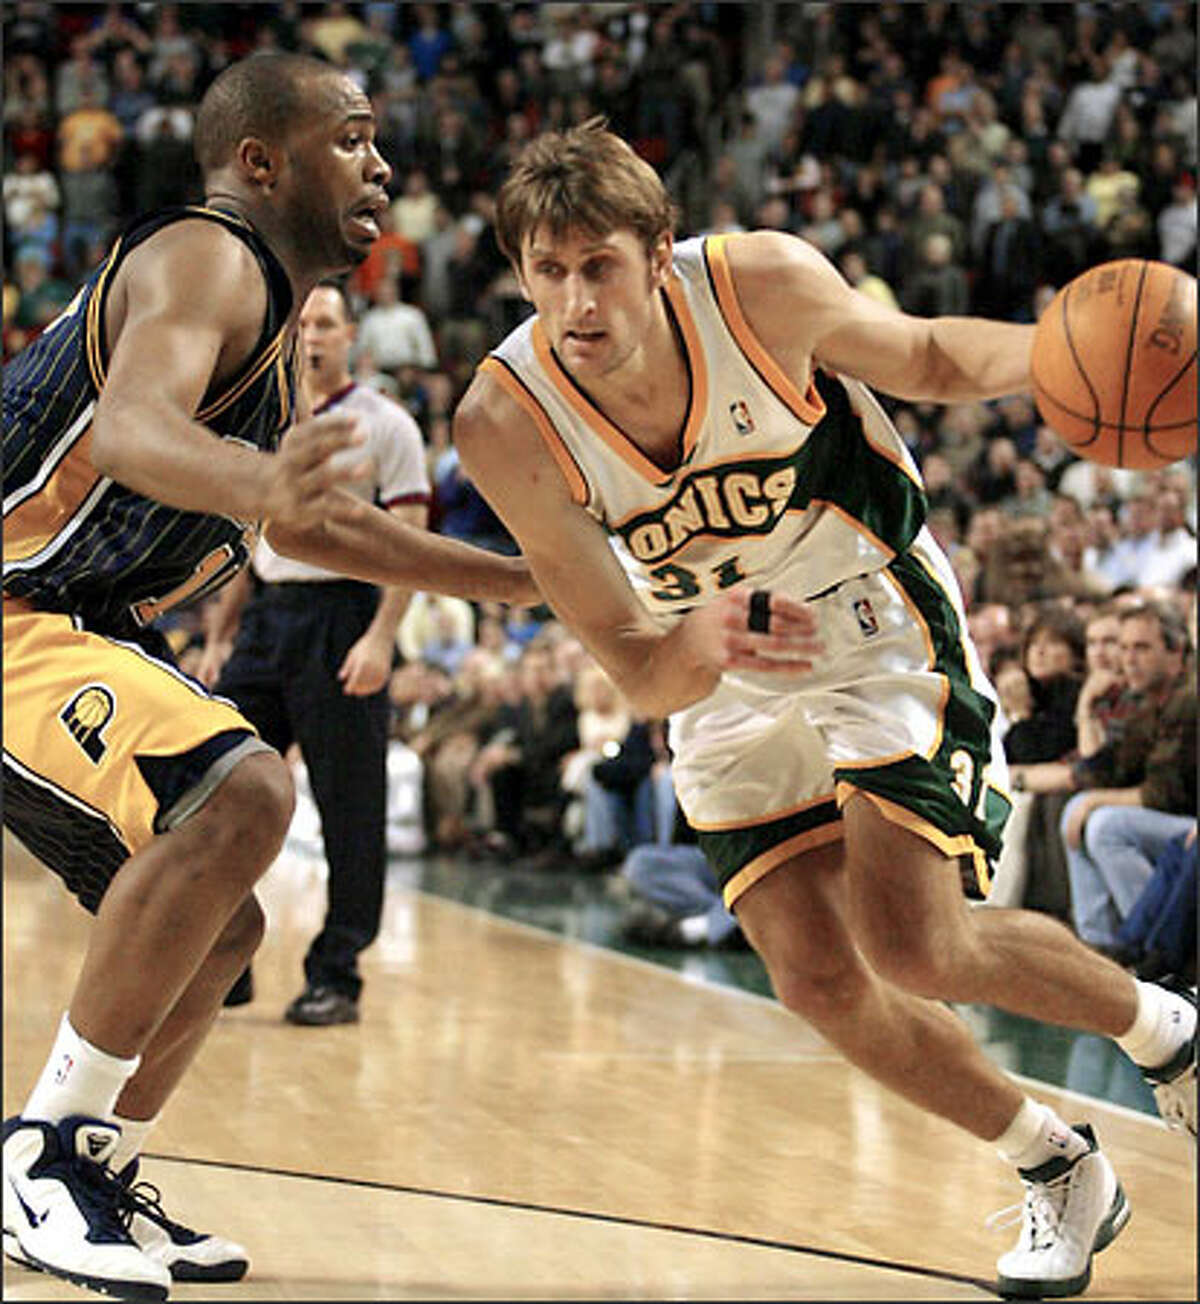 Sonics' Brent Barry dribbles past Pacers' Jamaal Tinsley.